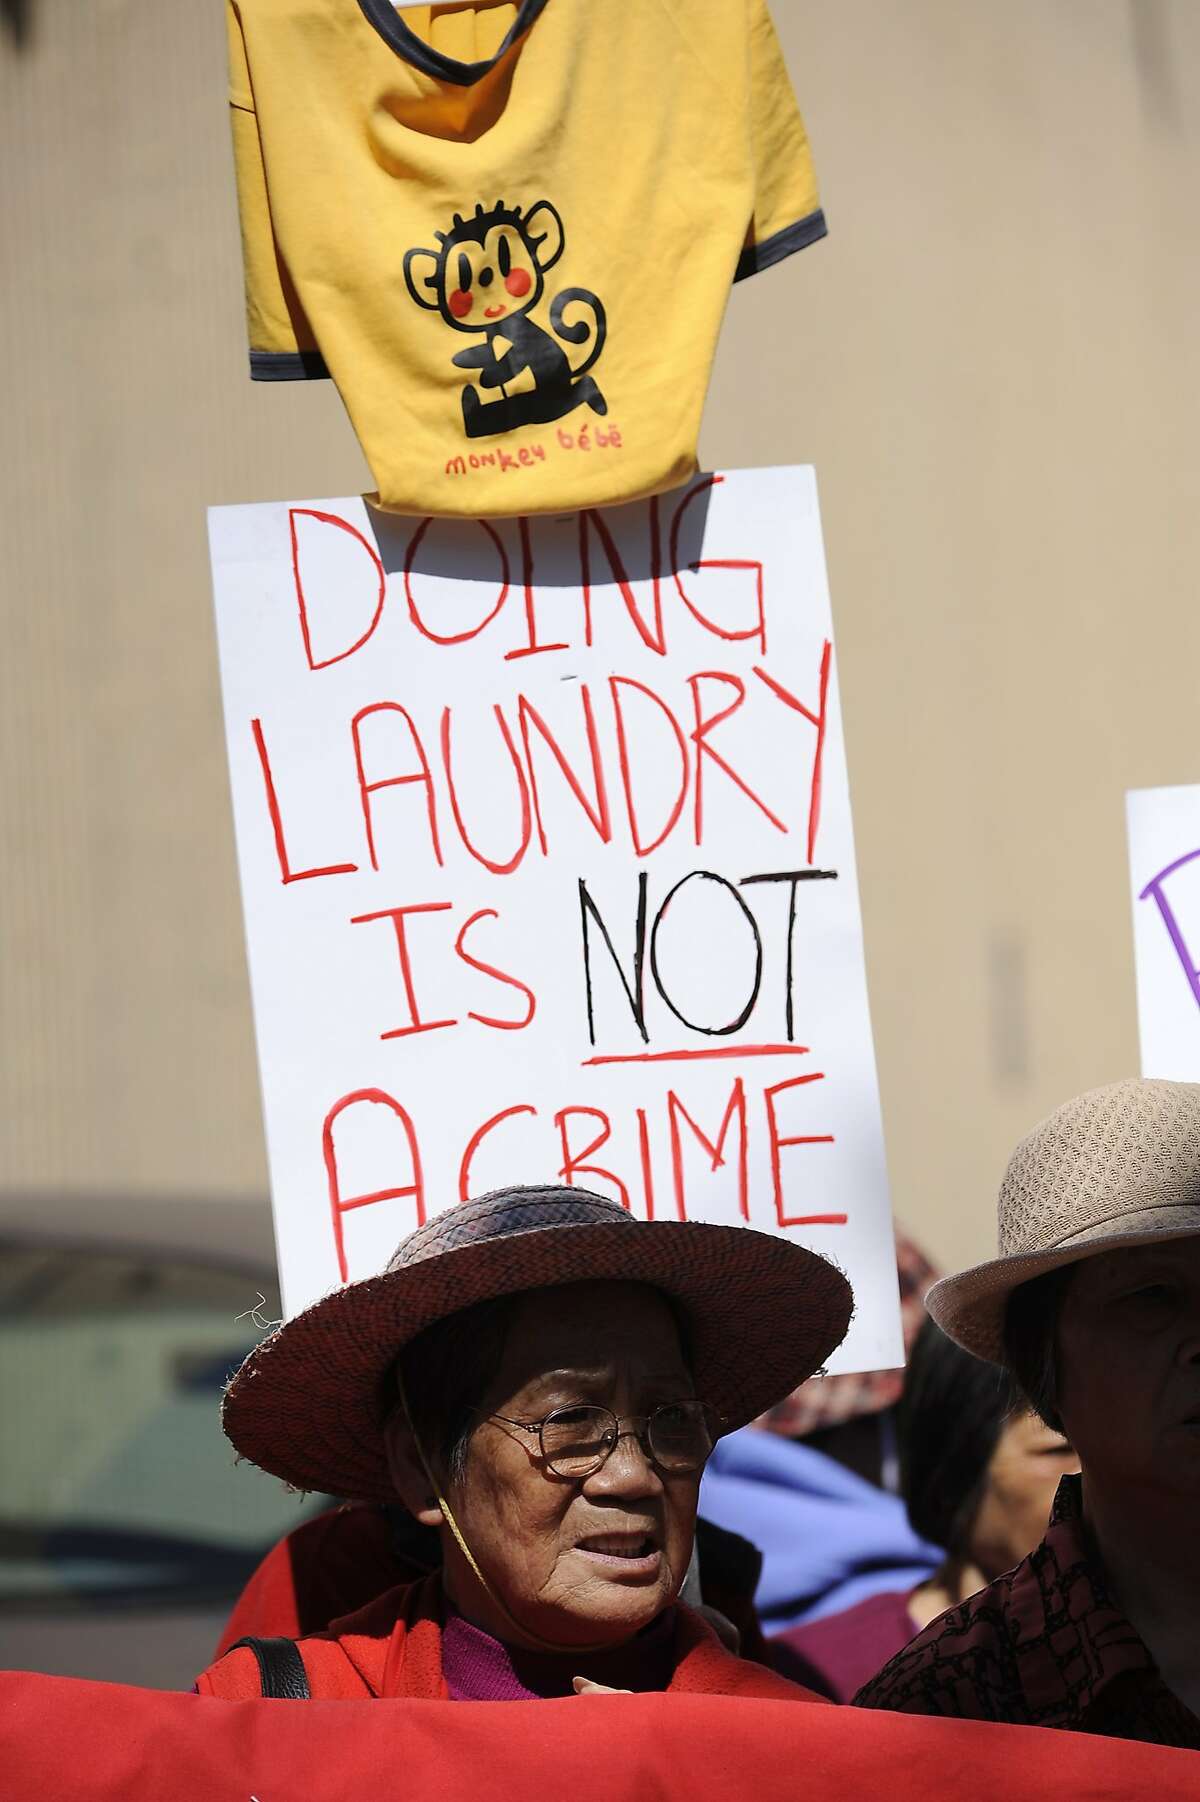 Tenants and activists protest in front of the Vallejo Emery Apartments in Chinatown who's owner they say is trying to evict longtime residents so that the rooms can be rented to higher paying tech workers, in San Francisco, CA, on Thursday, March 26, 2015.